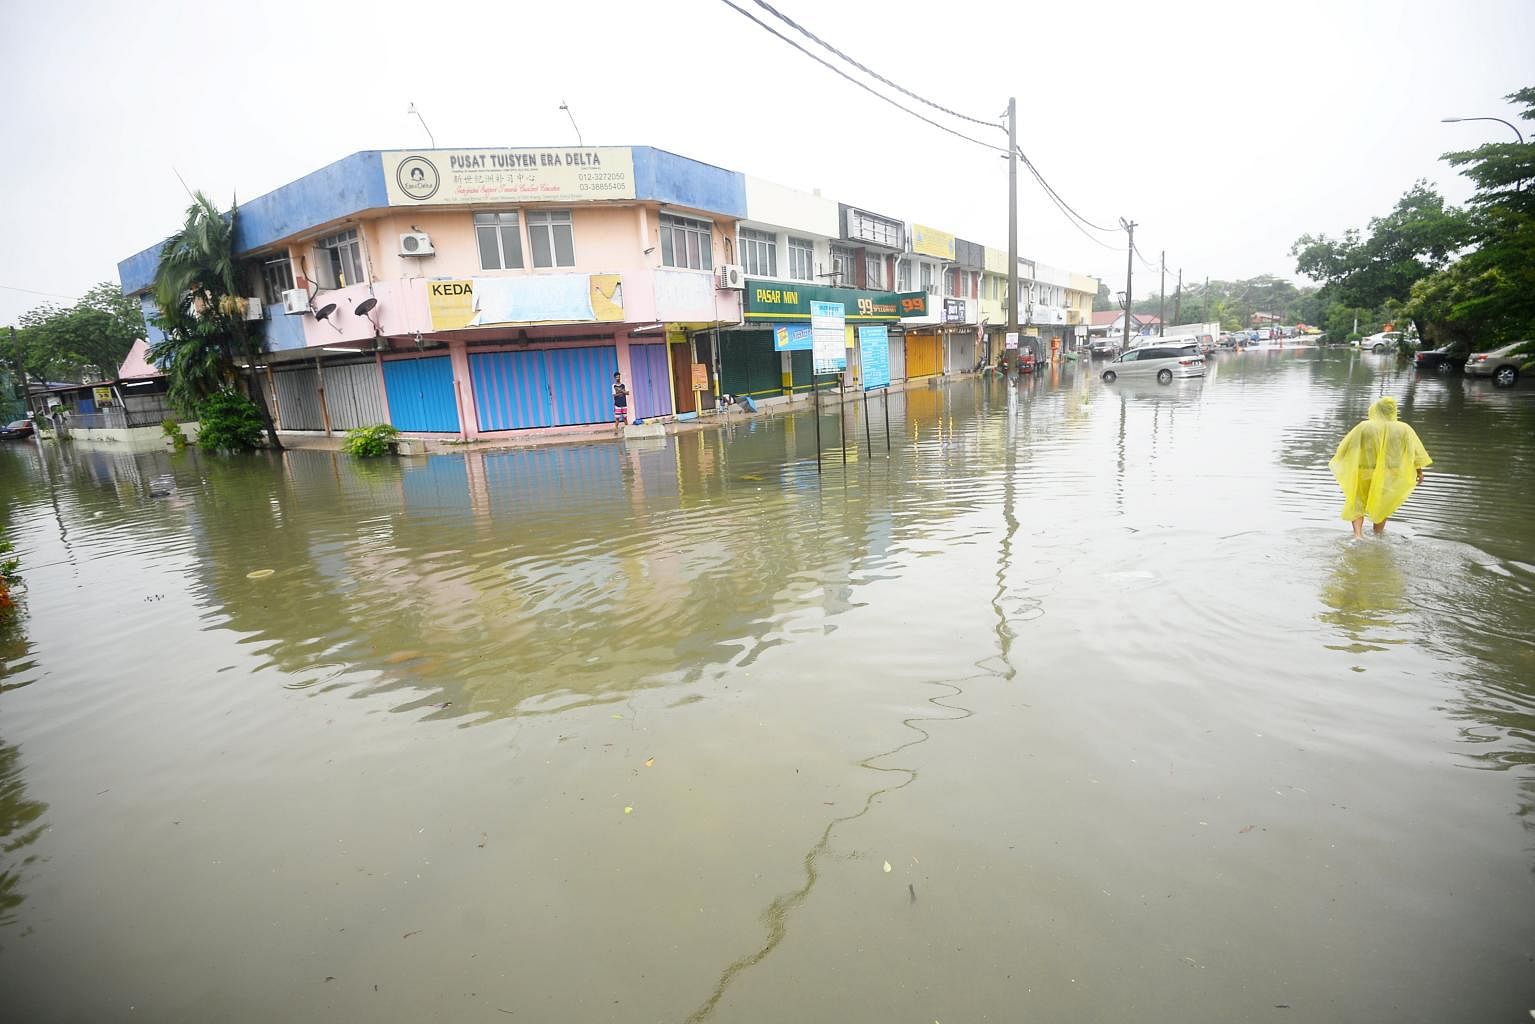 Flood in klang valley today